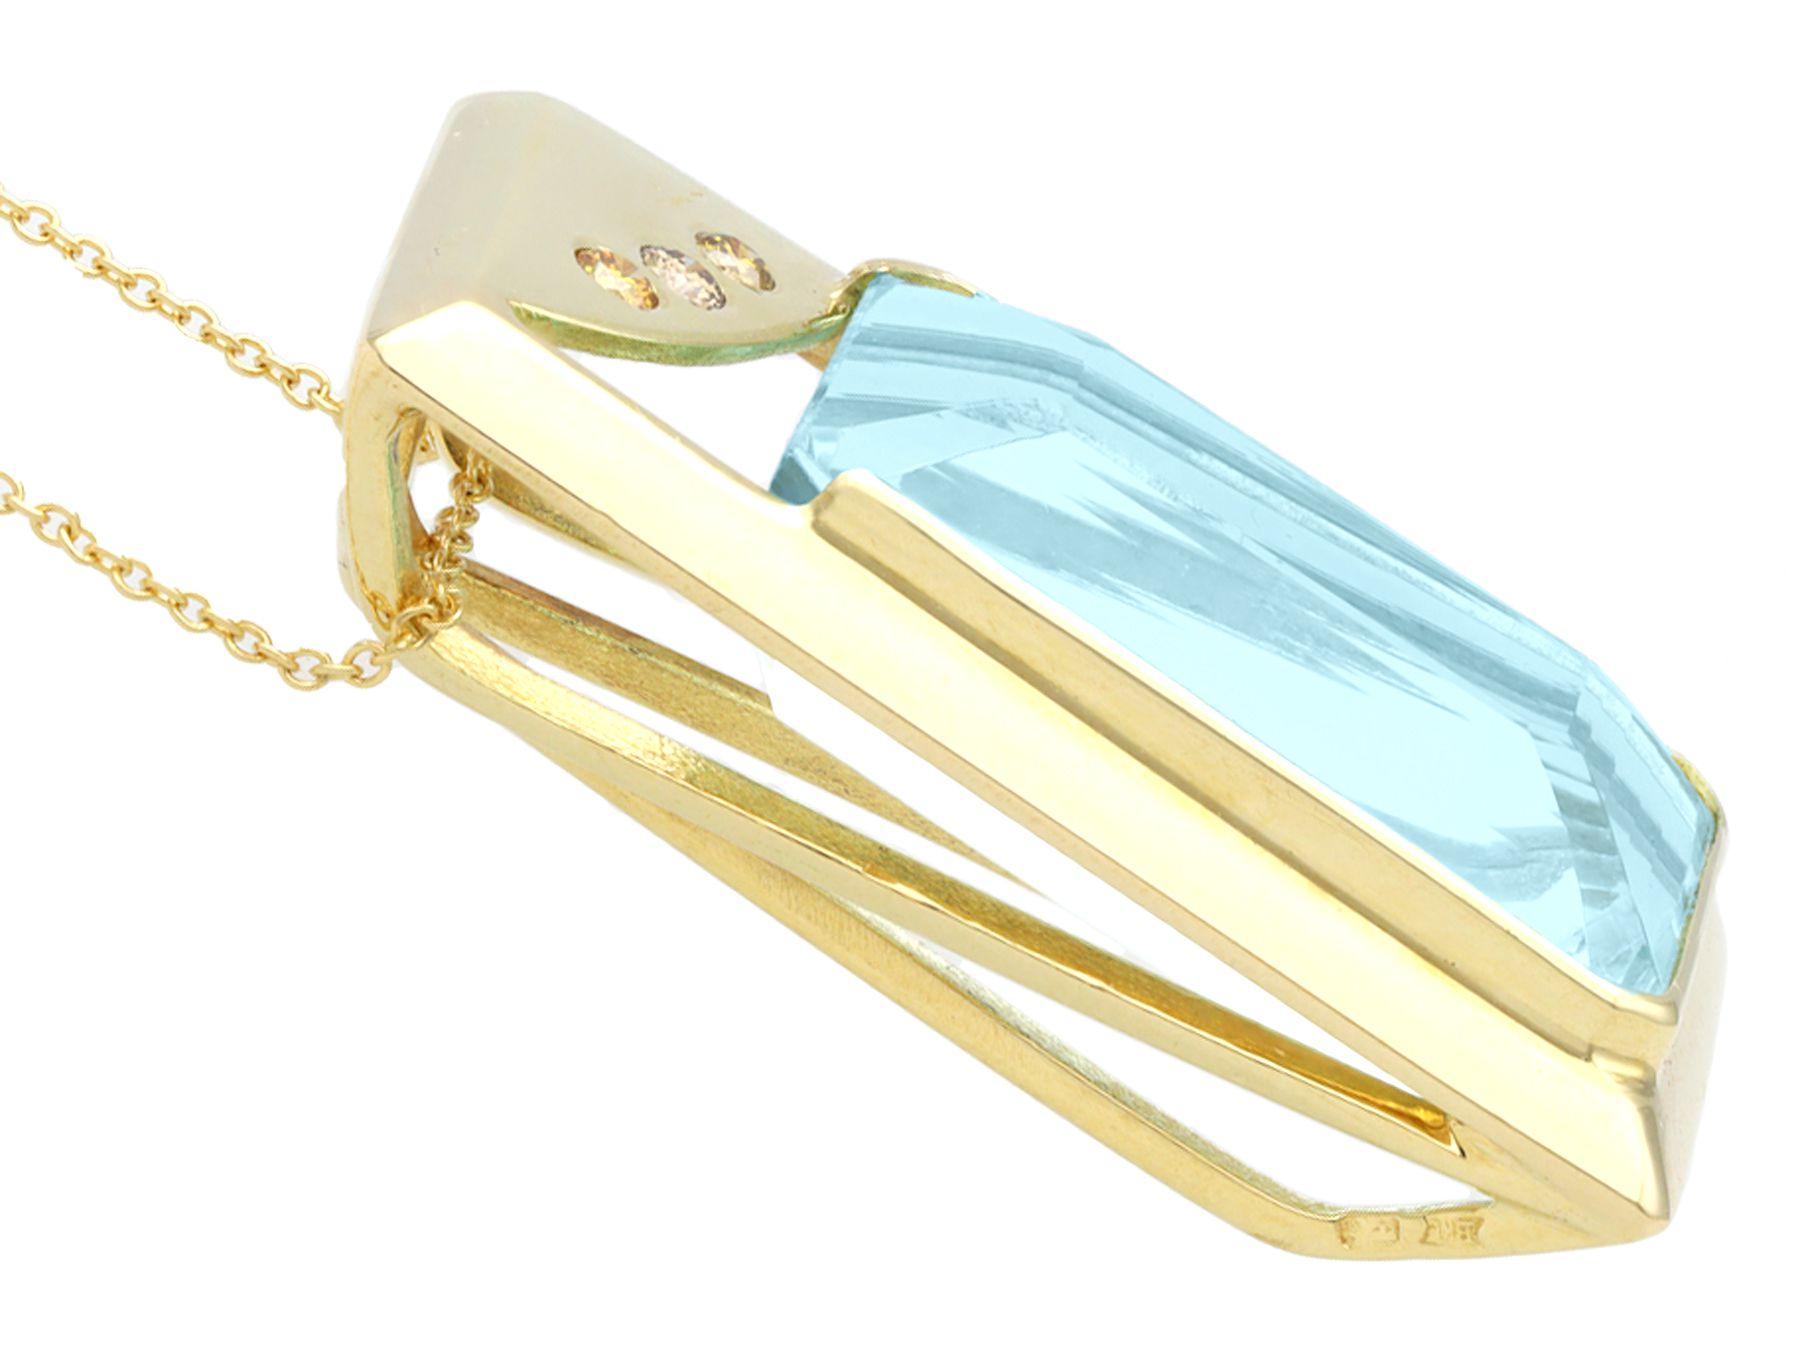 Hungarian 29.50 Carat Aquamarine and Diamond 14K Yellow Gold Pendant In Excellent Condition For Sale In Jesmond, Newcastle Upon Tyne